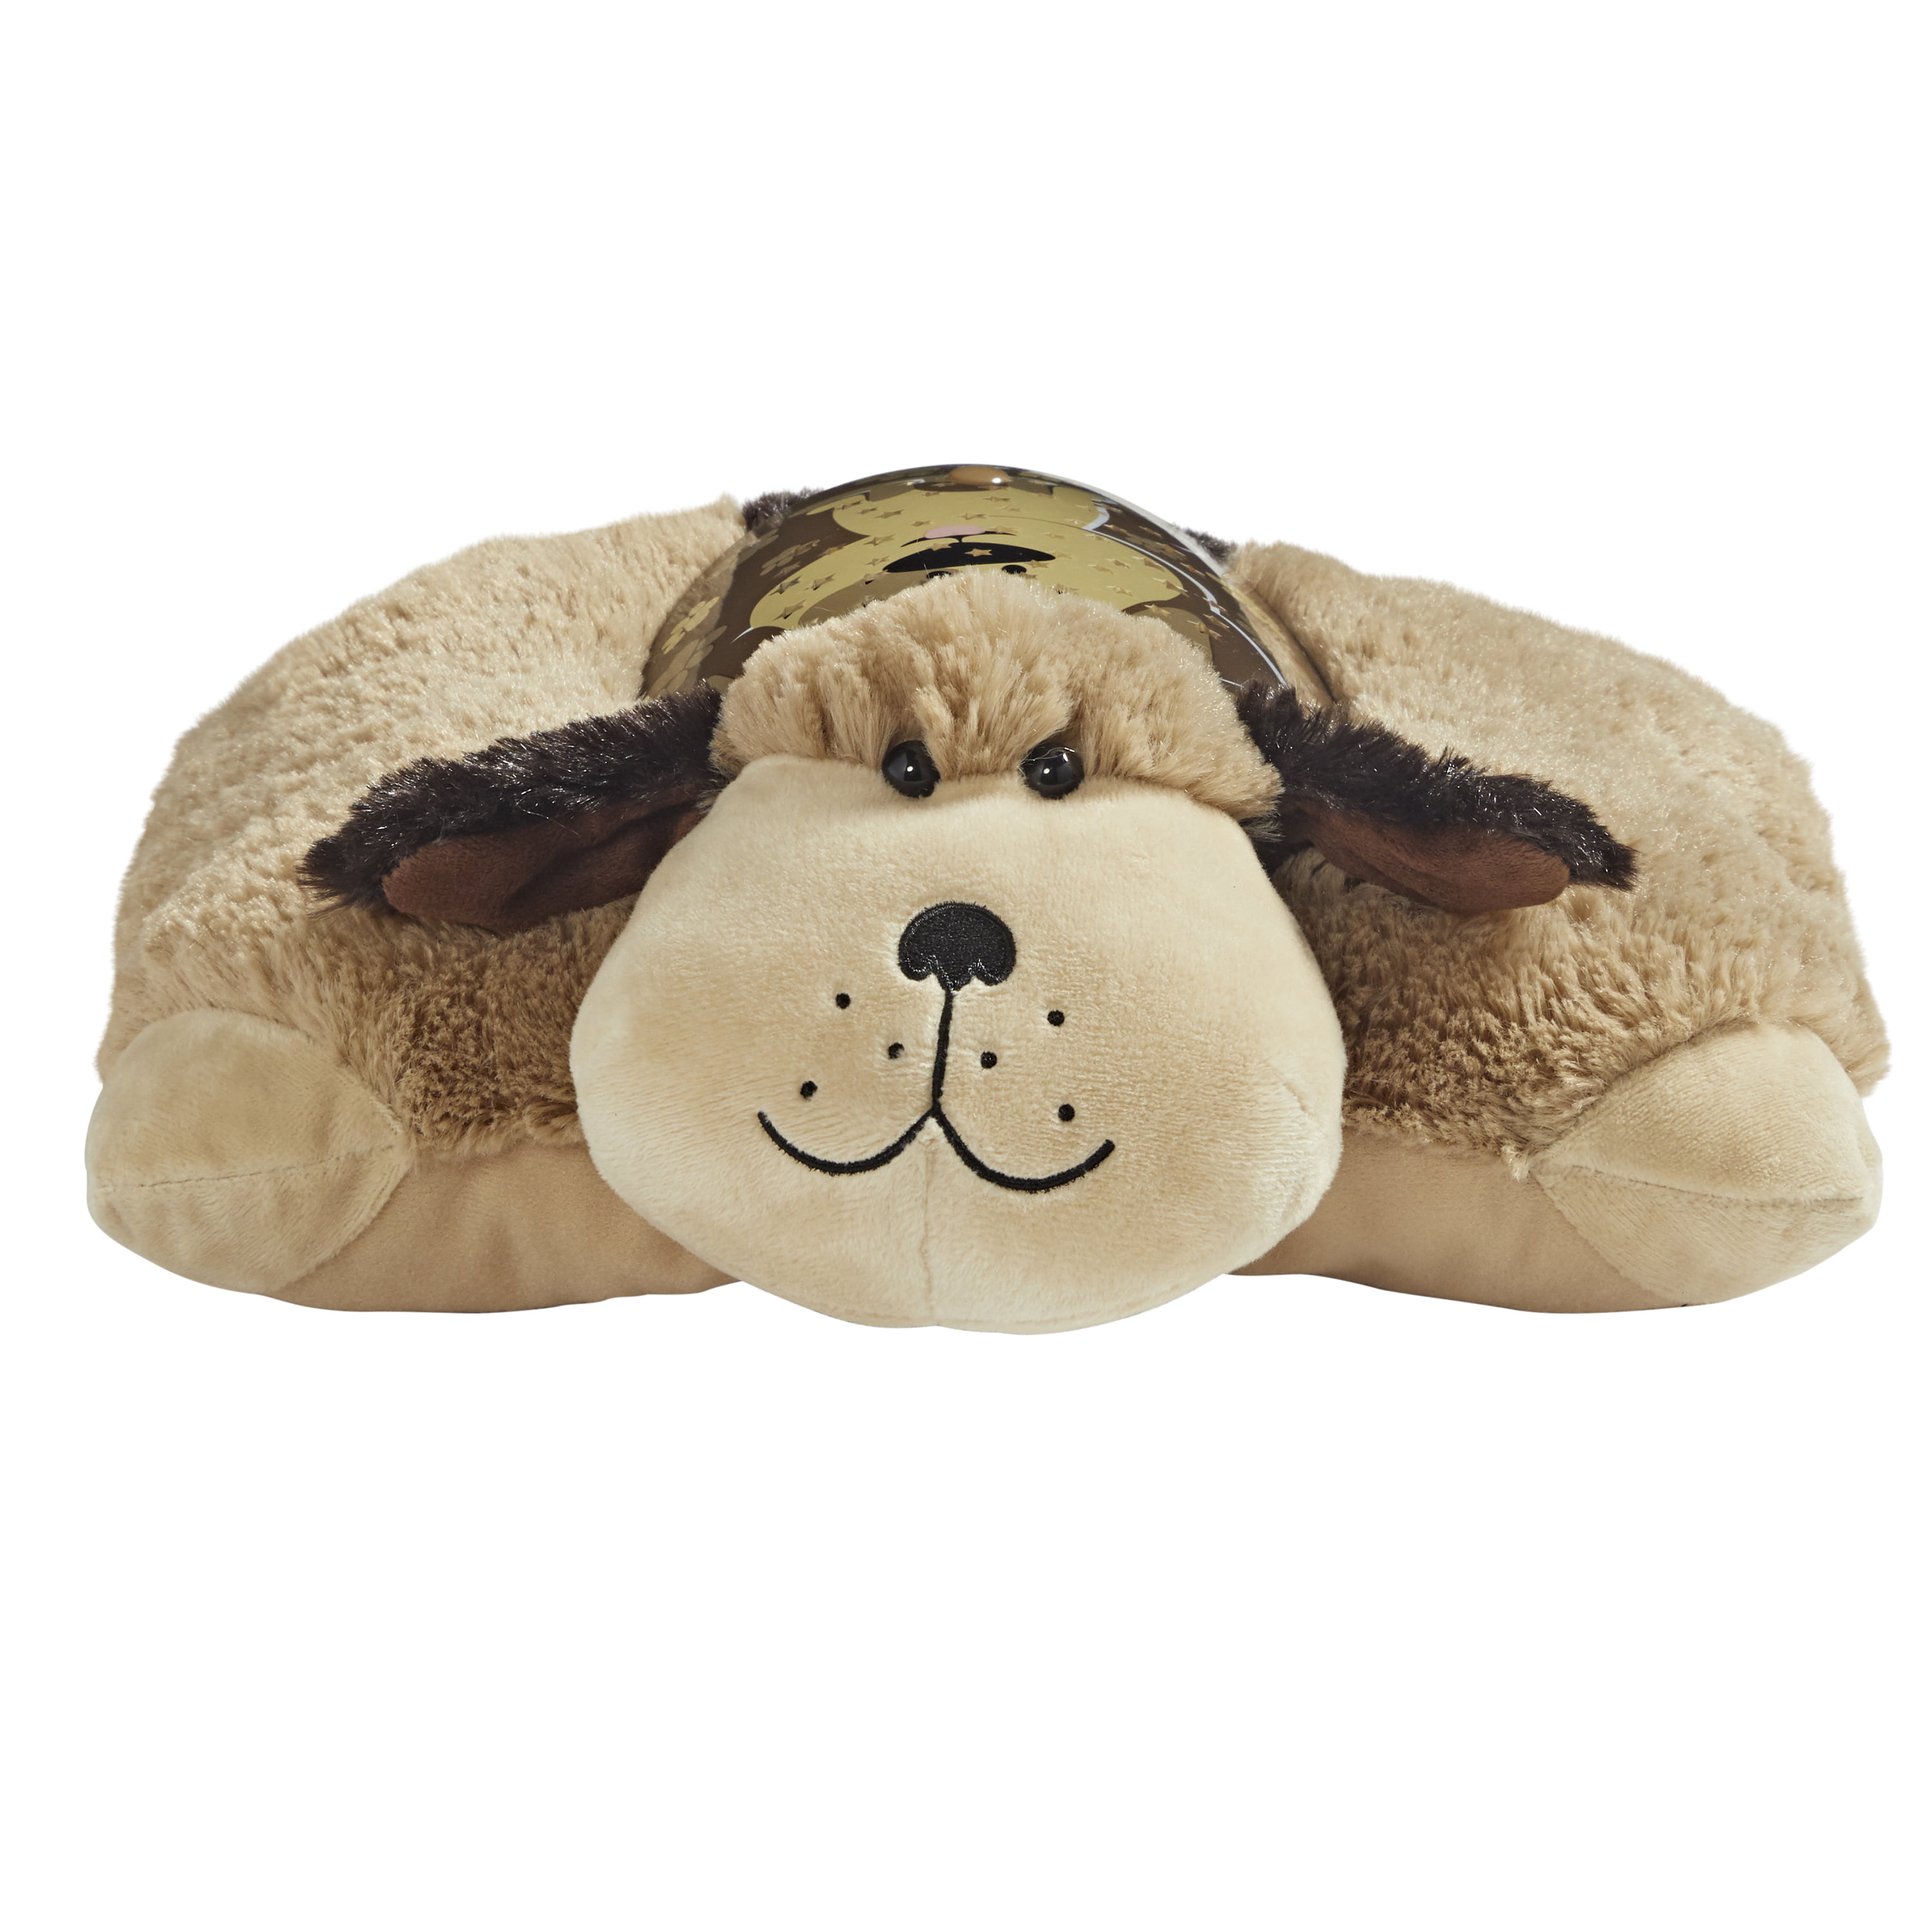 Snuggly Puppy Sleeptime Kids' Led Lite Plush - Pillow Pets : Target